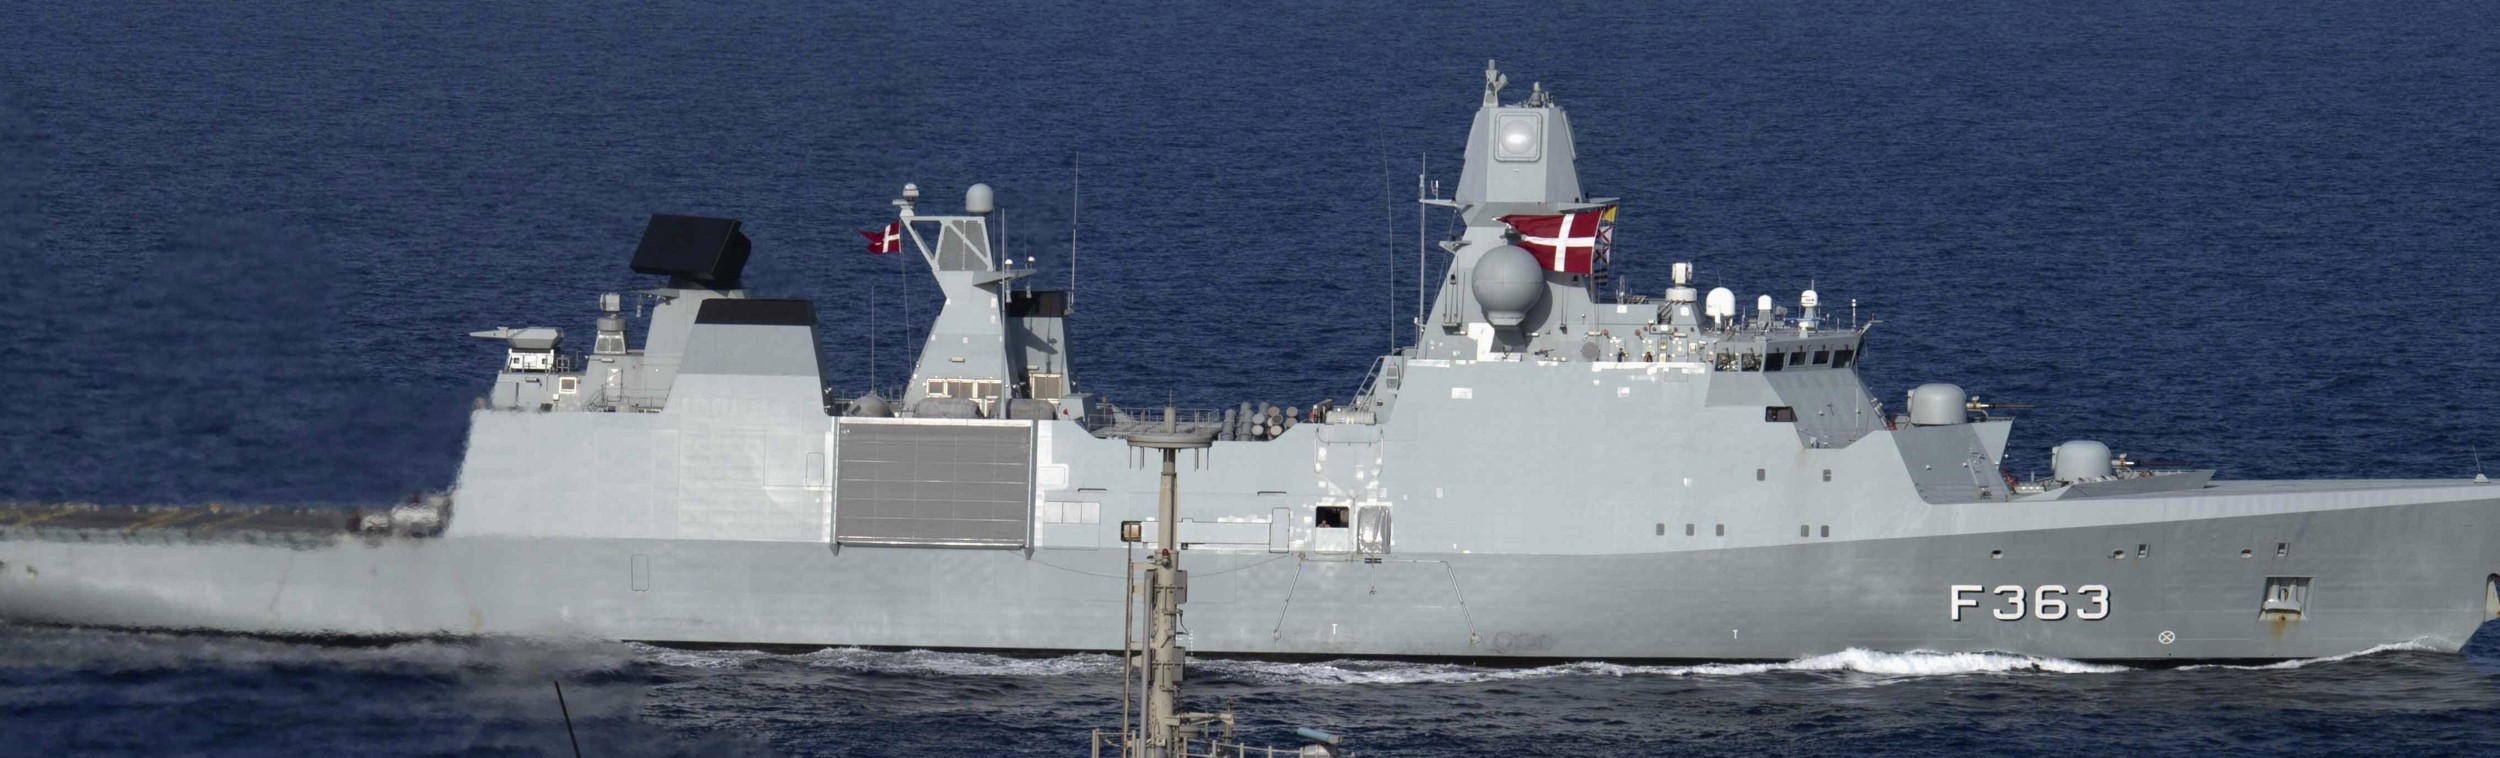 f-363 hdms niels juel iver huitfeldt class guided missile frigate ffg royal danish navy 15